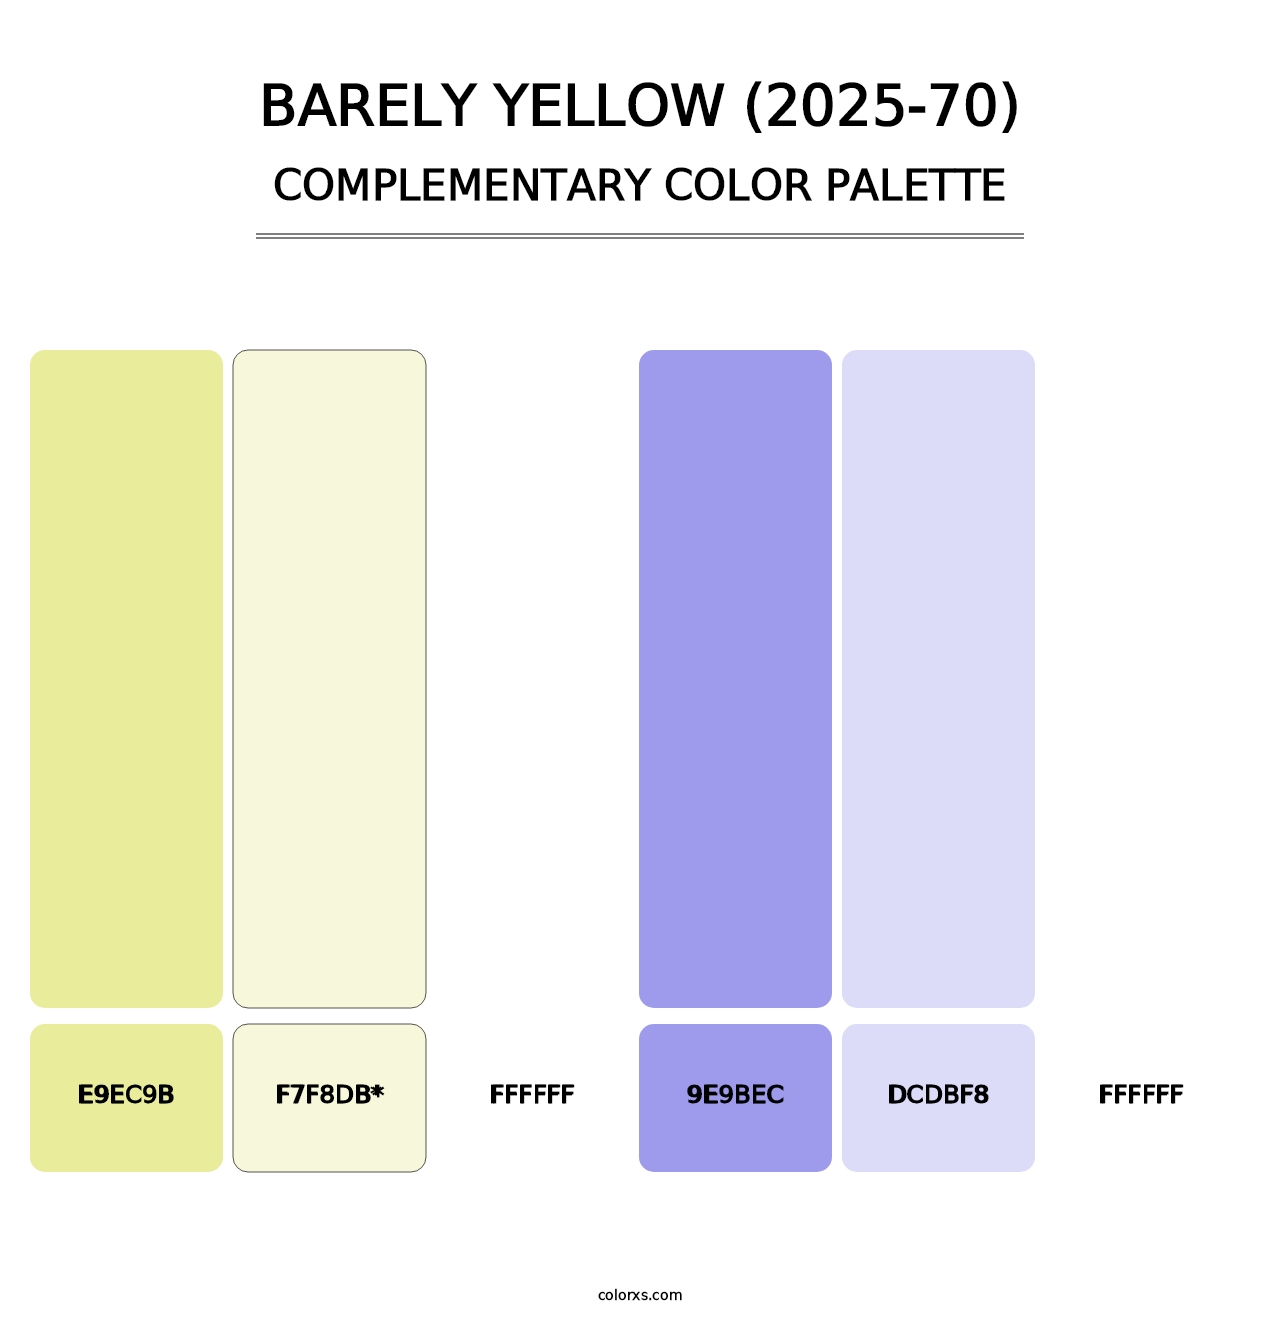 Barely Yellow (2025-70) - Complementary Color Palette